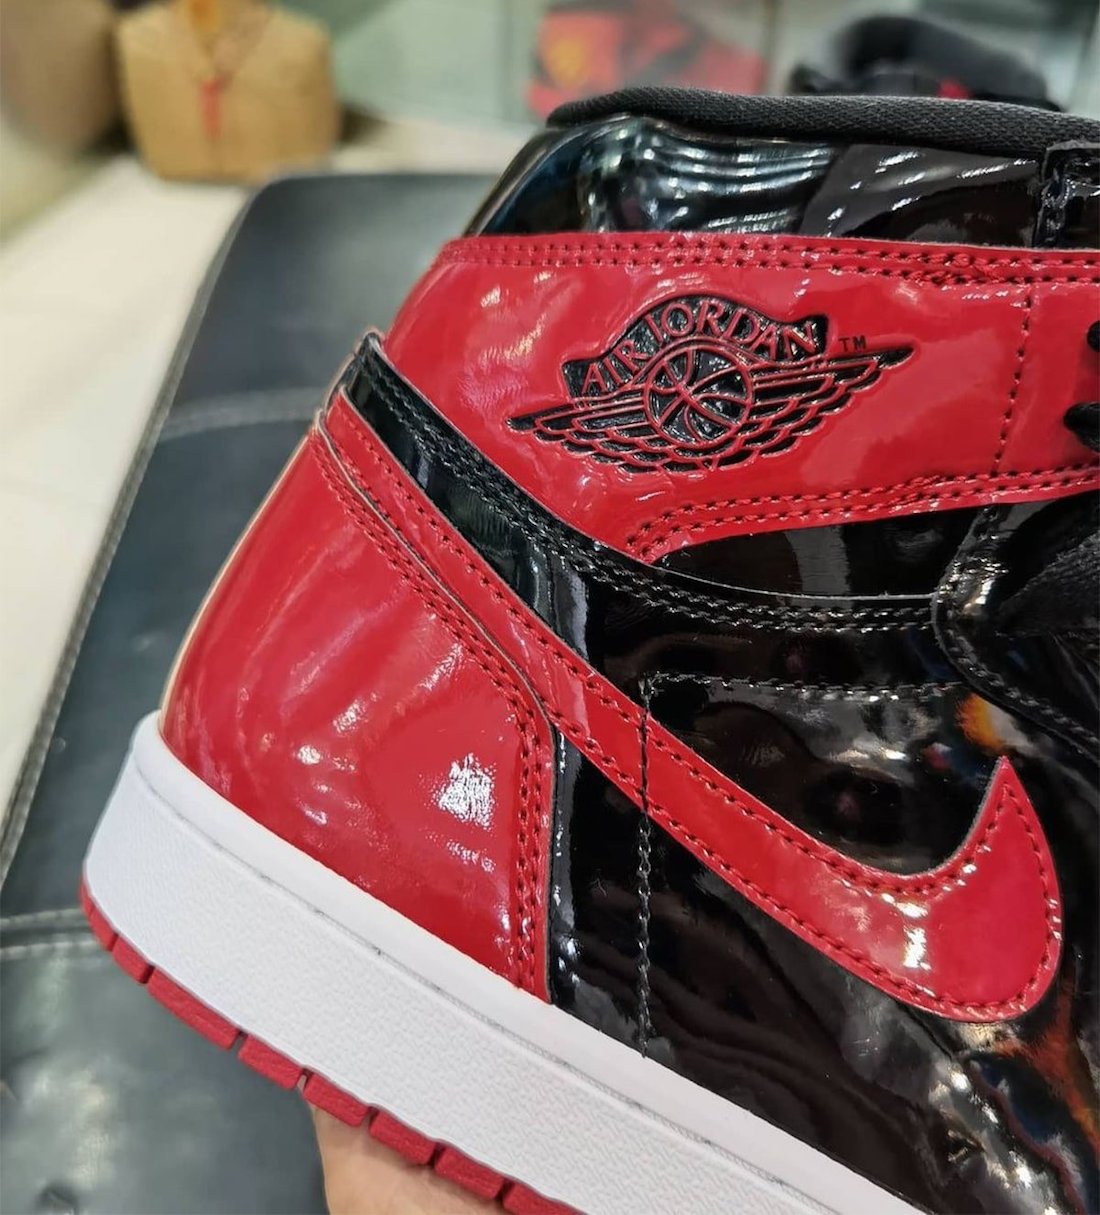 Air Jordan 1 Bred Patent Leather Reimagined 555088-063 Release 